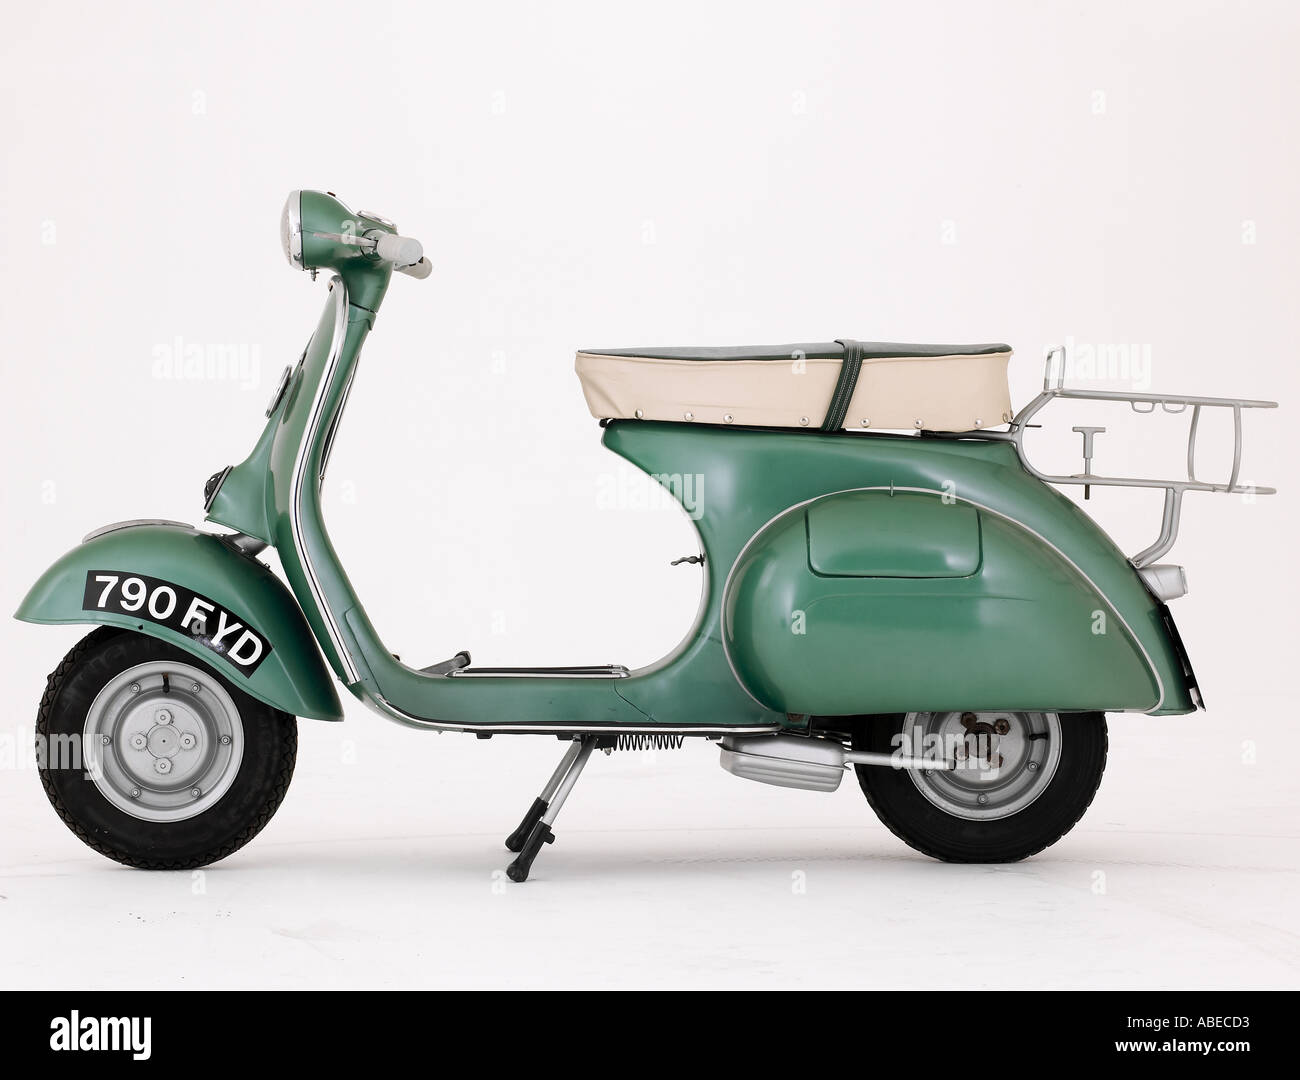 Vespa Scooter 1950s High Resolution Stock Photography and Images - Alamy